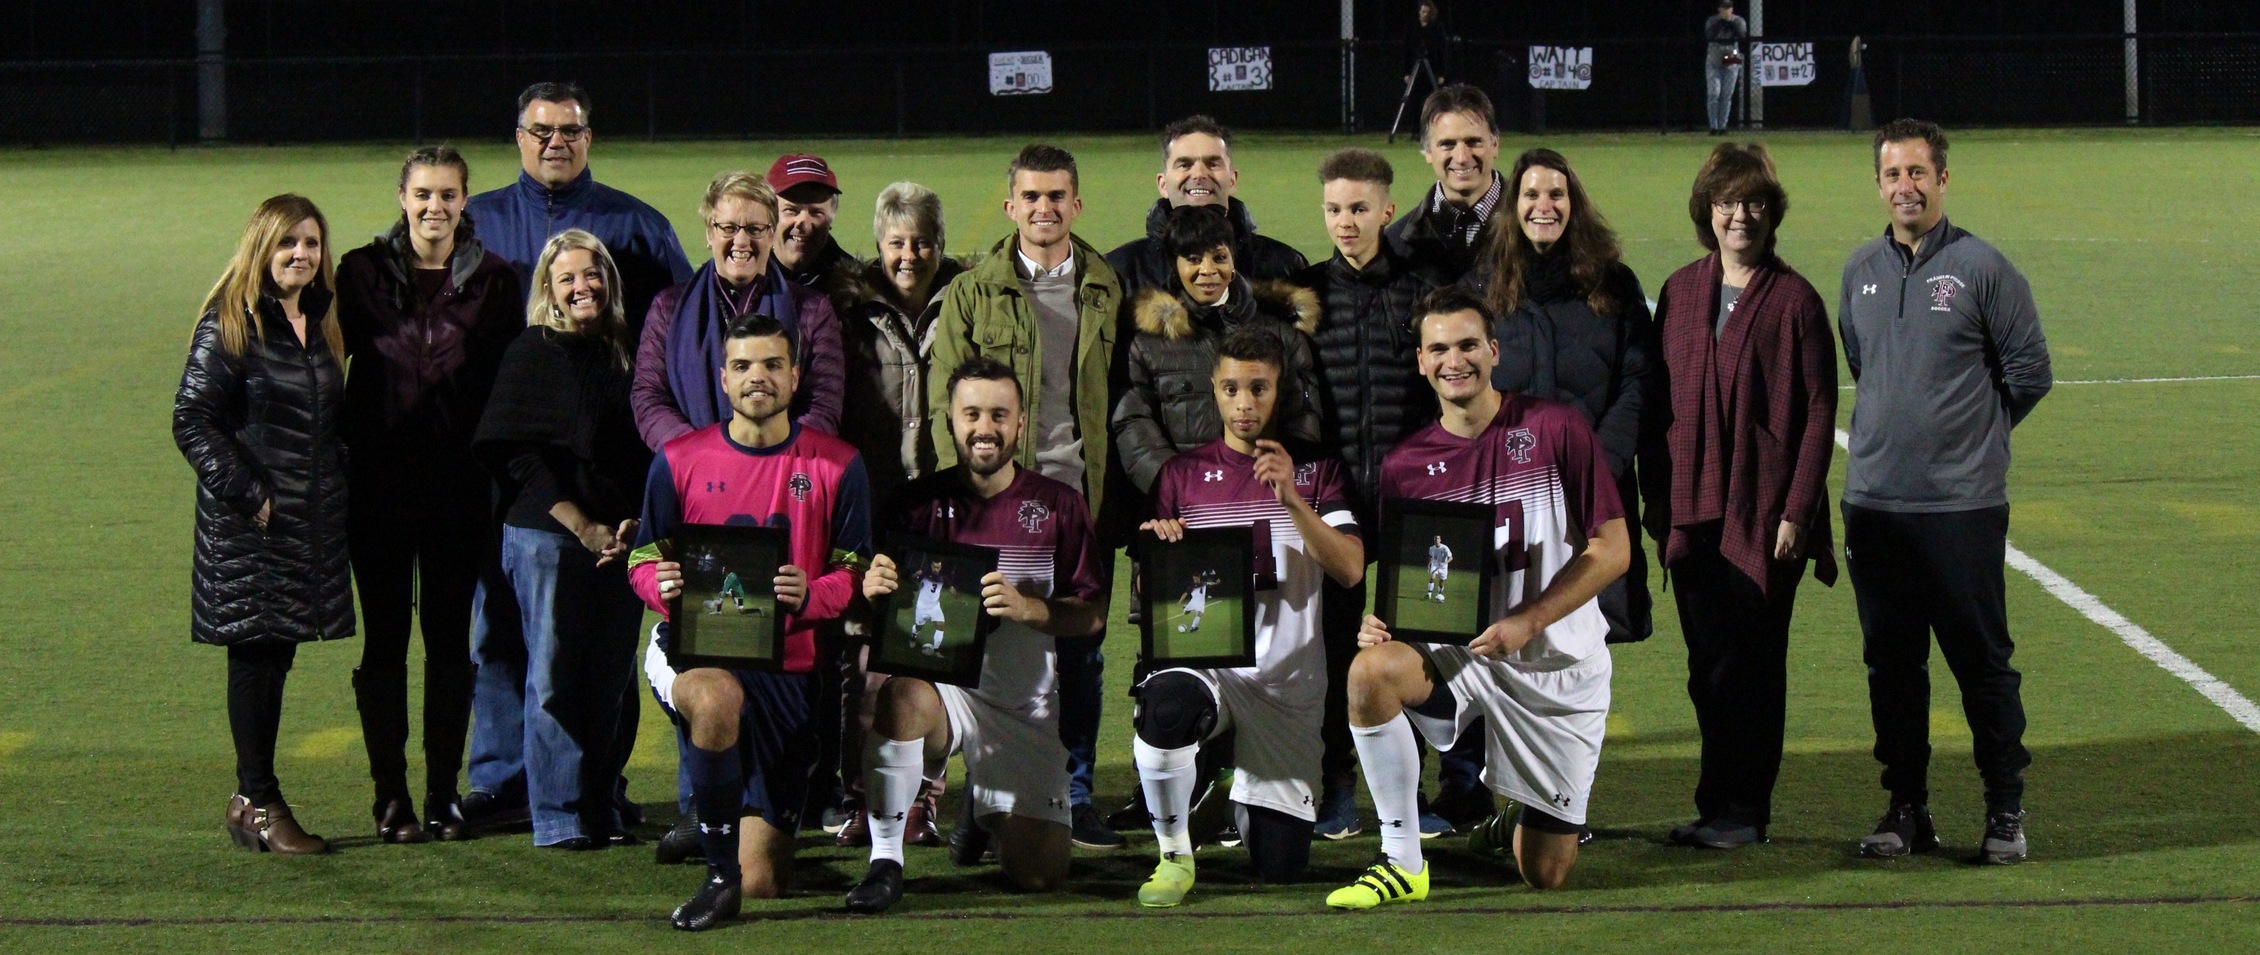 Ravens Clinch Postseason Berth for Second Straight Year with 3-1 Senior Night Win